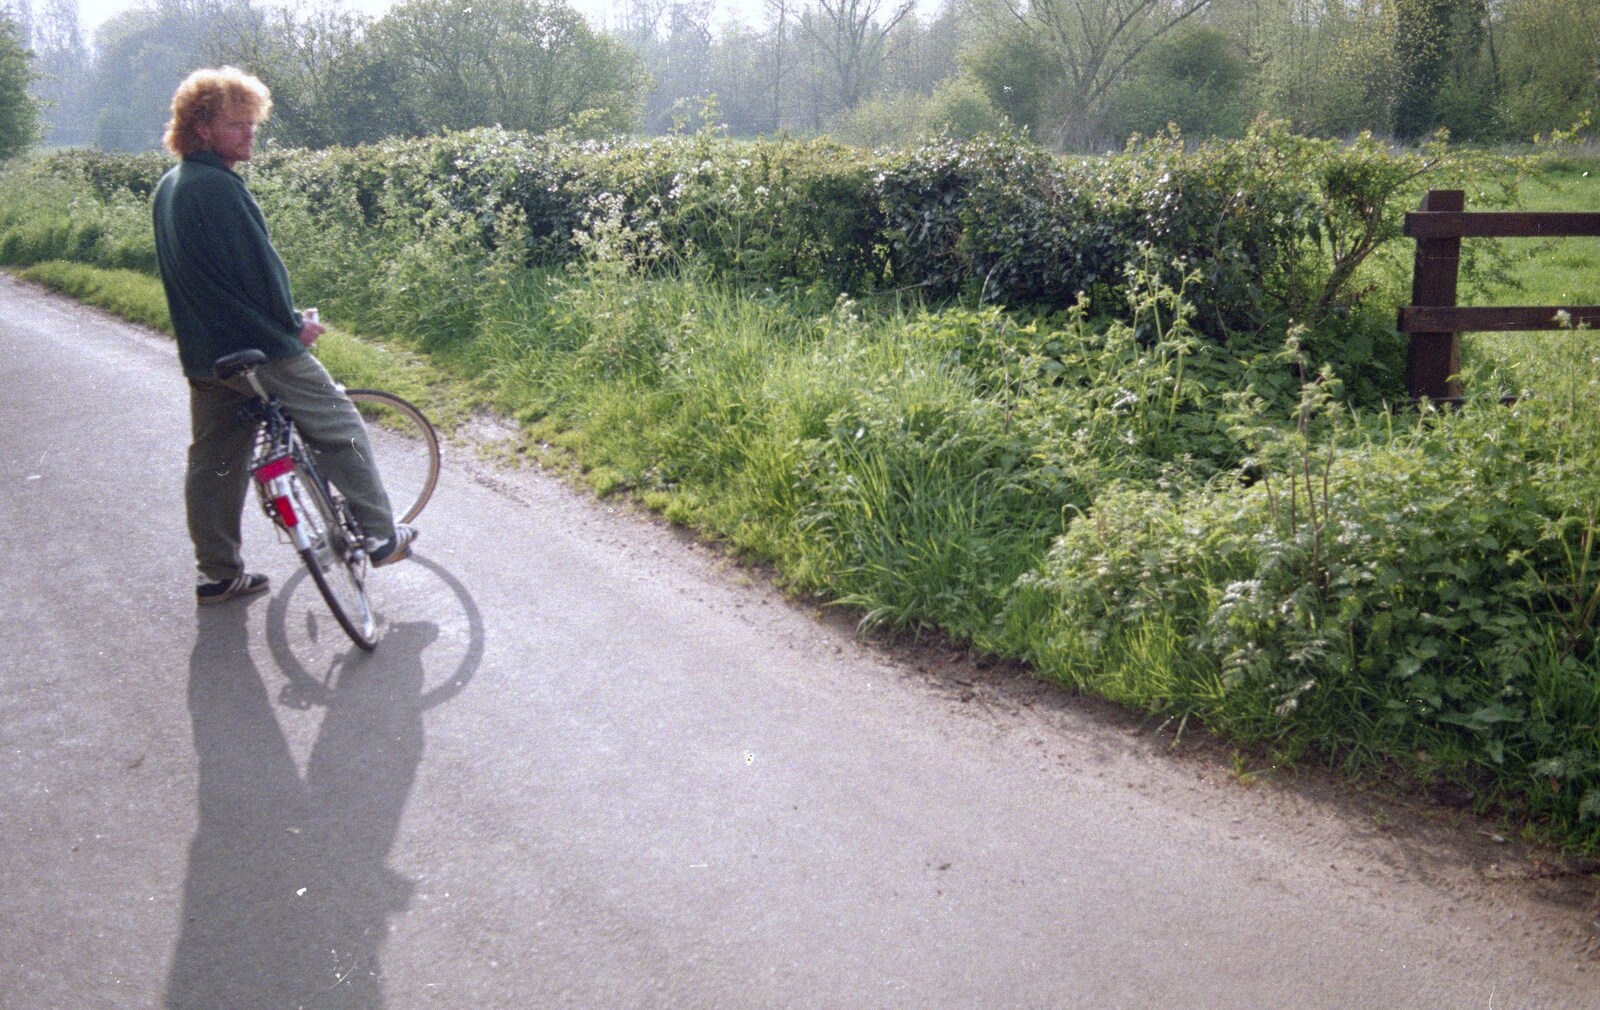 Wavy waits on the Syleham Road from A BSCC Bike Ride, Brockdish Greyhound and Hoxne Swan, Suffolk - 4th May 2000